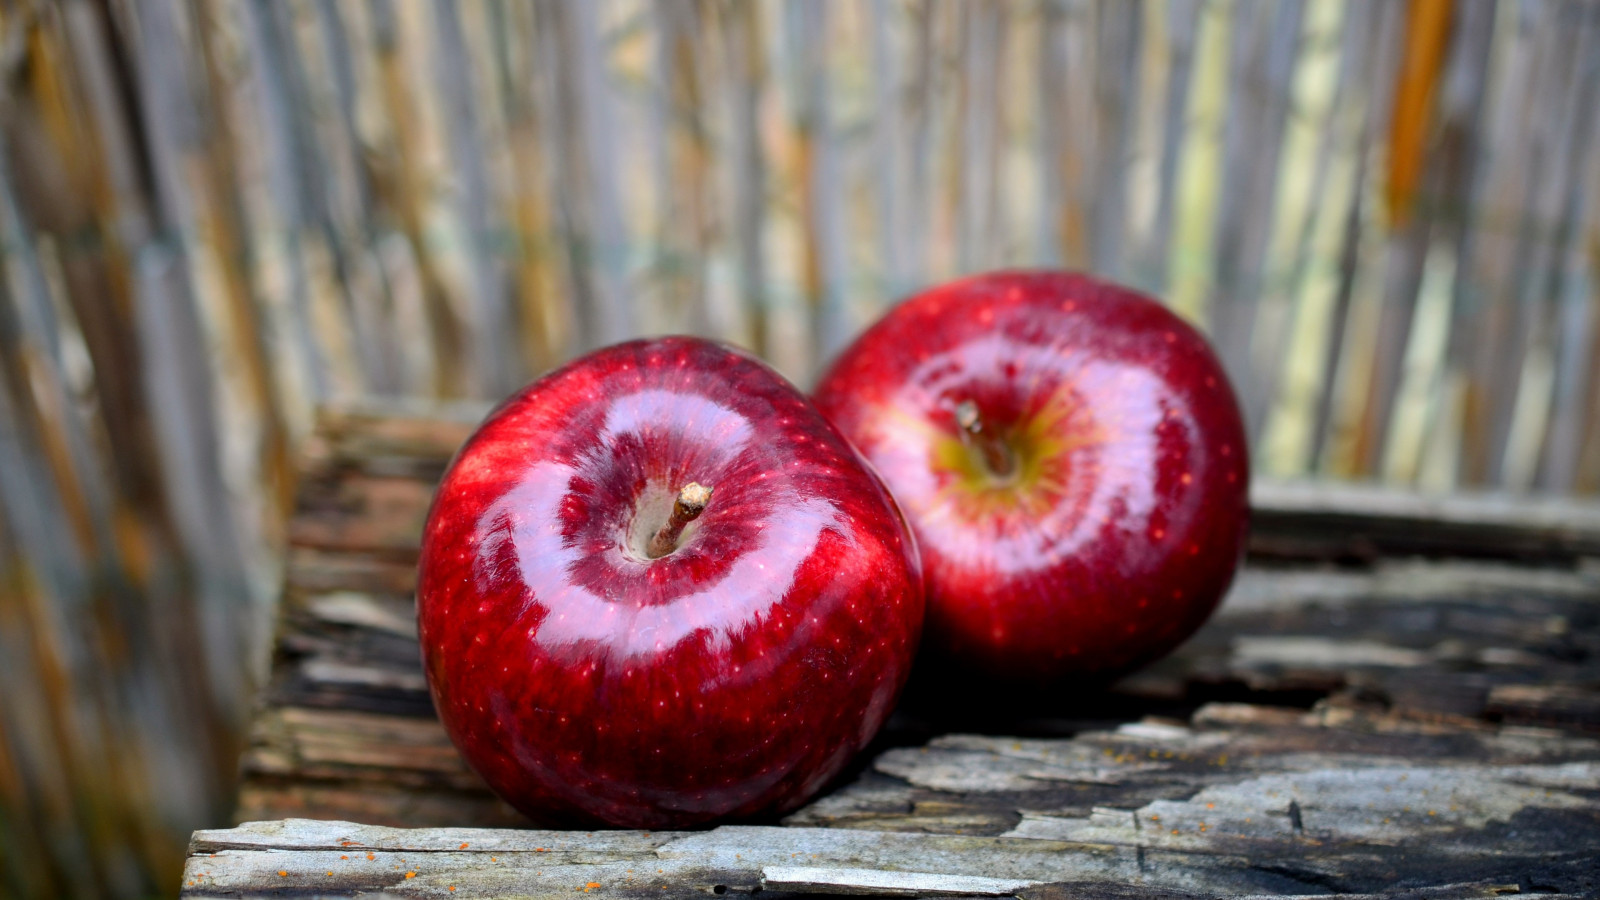 Delicious red apples wallpaper 1600x900